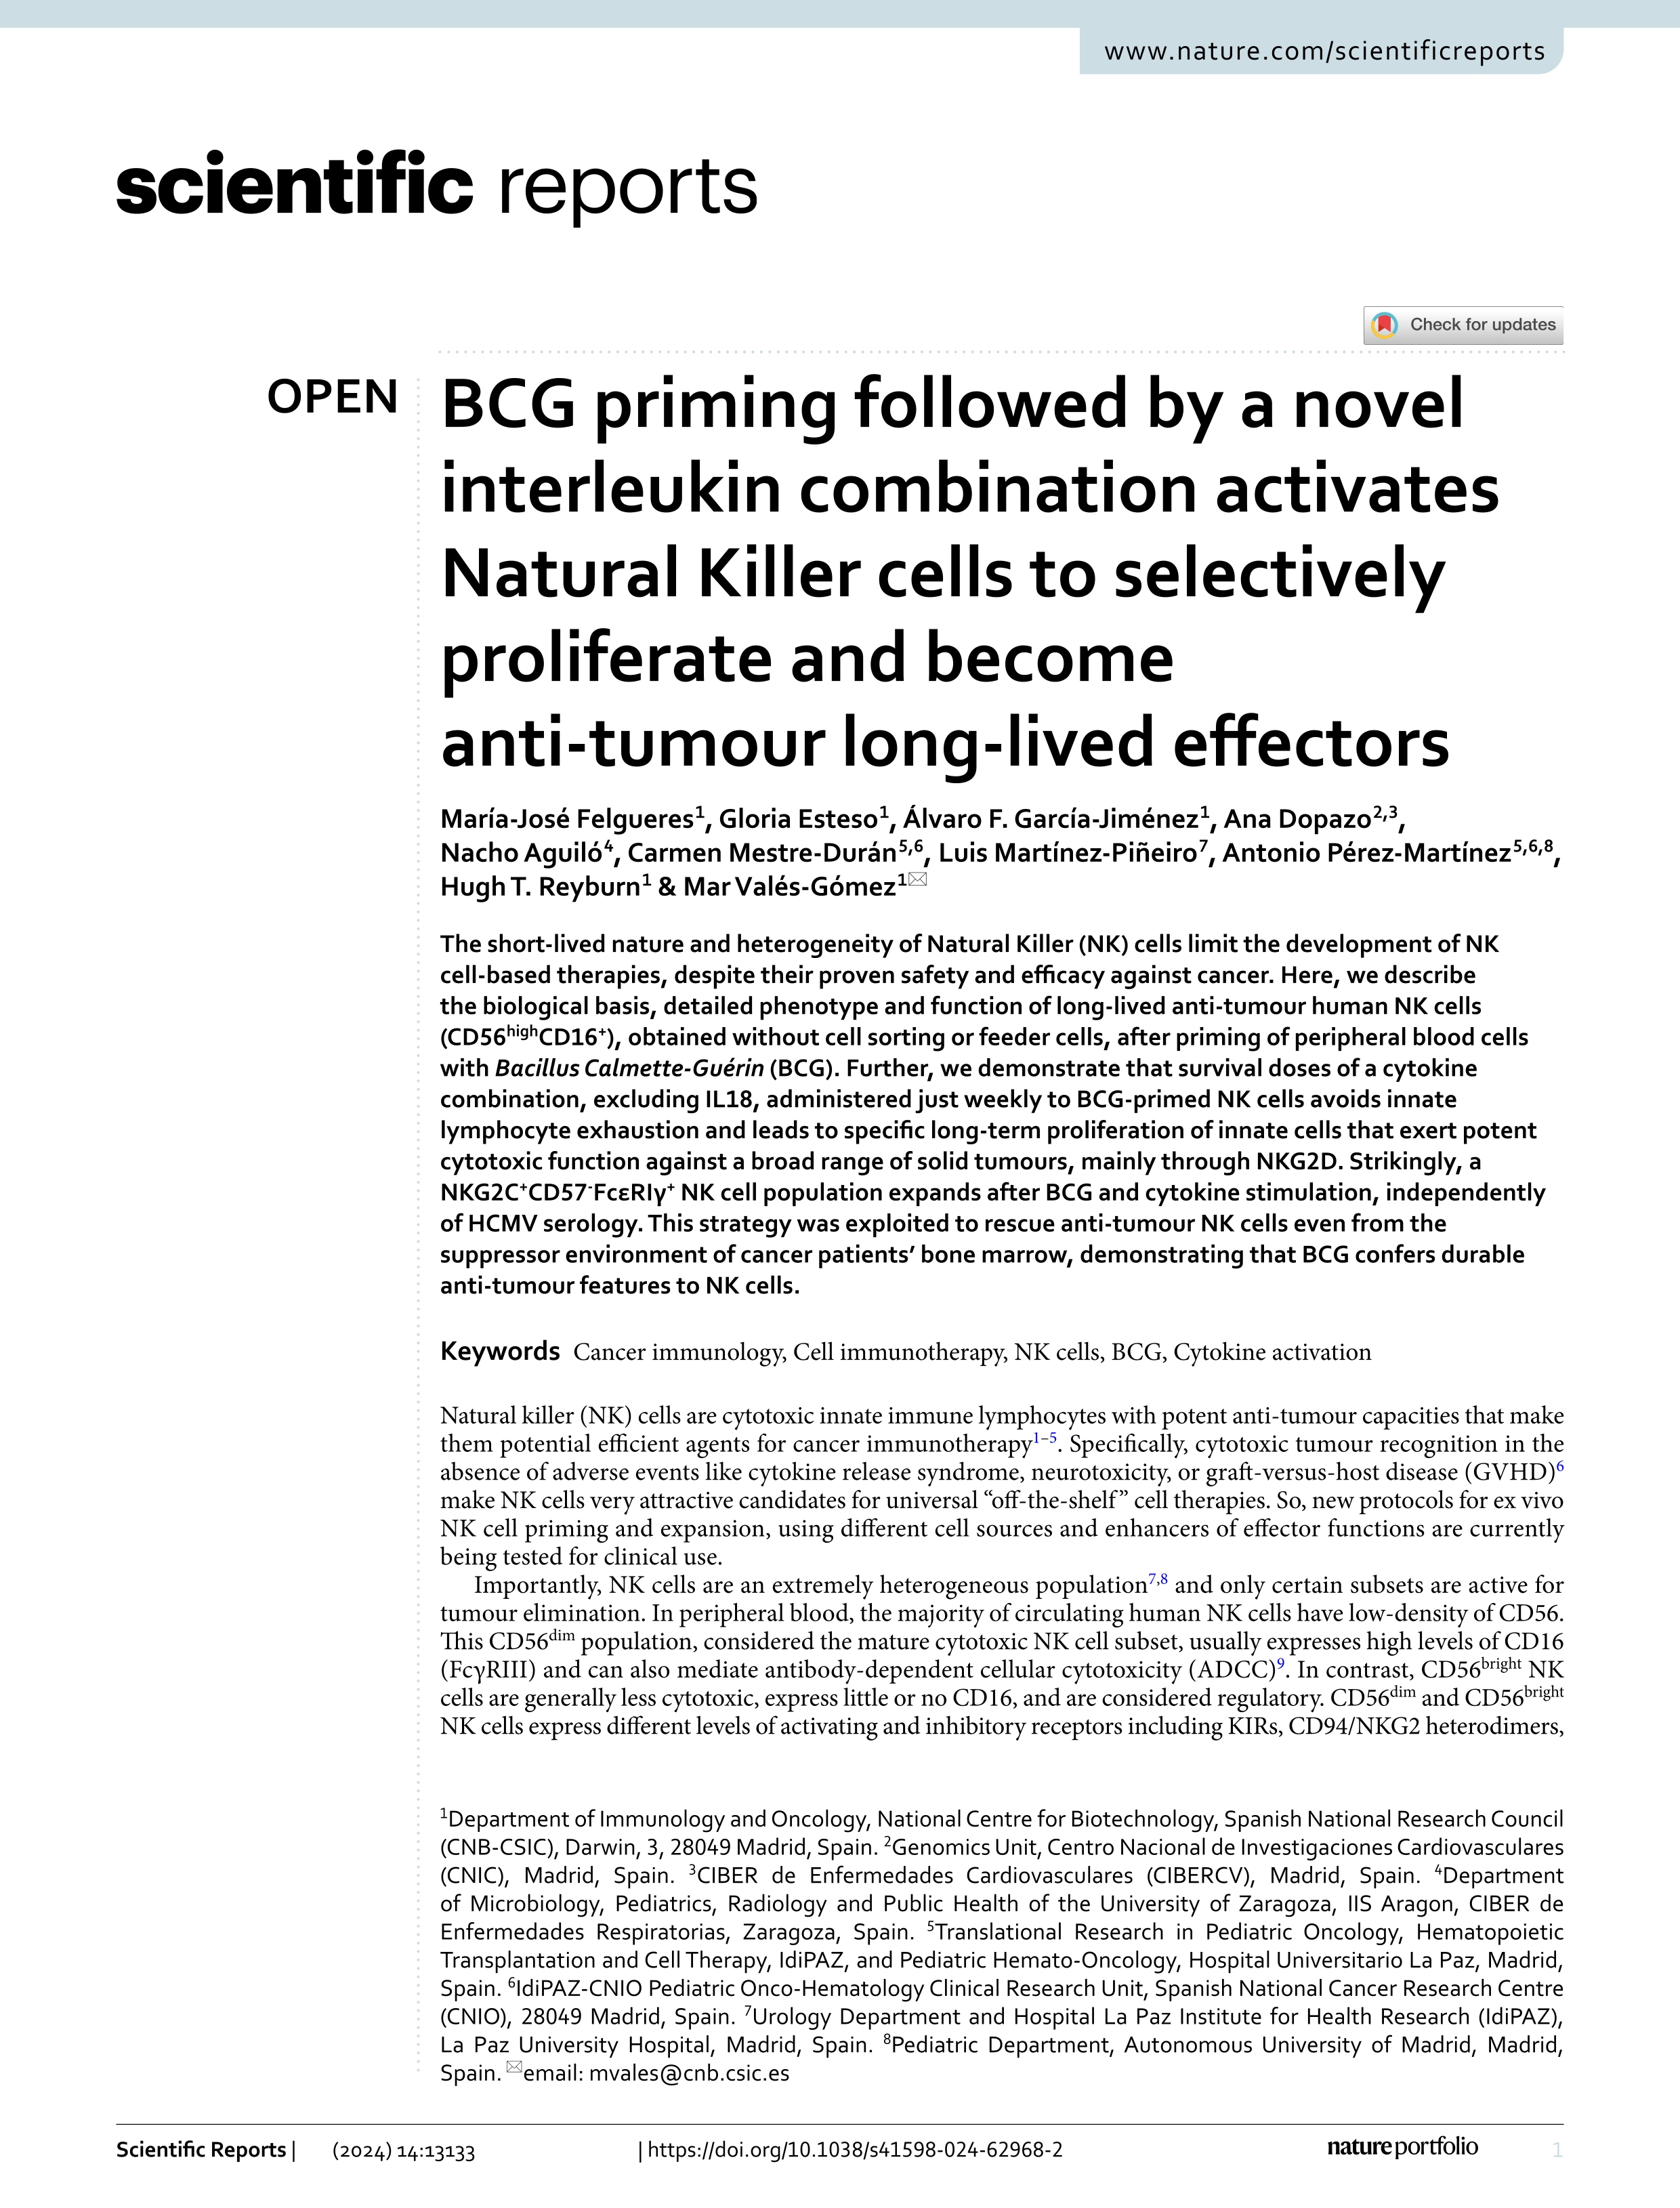 BCG priming followed by a novel interleukin combination activates Natural Killer cells to selectively proliferate and become anti-tumour long-lived effectors